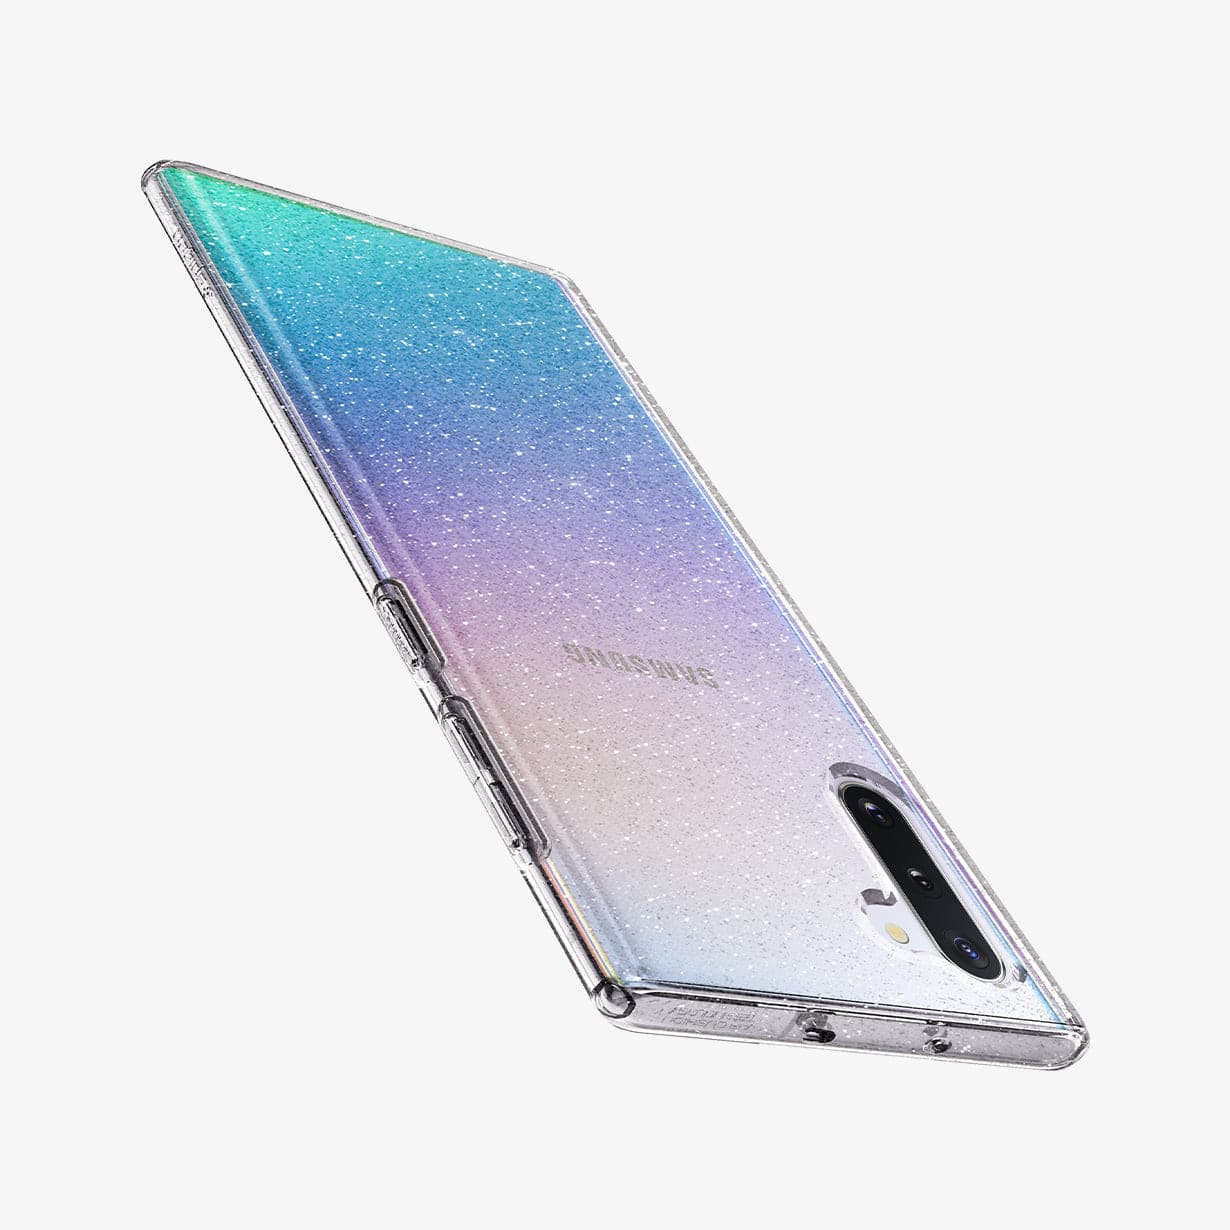 628CS27371 - Galaxy Note 10 Series Liquid Crystal Glitter Case in crystal quartz showing the back, side and top